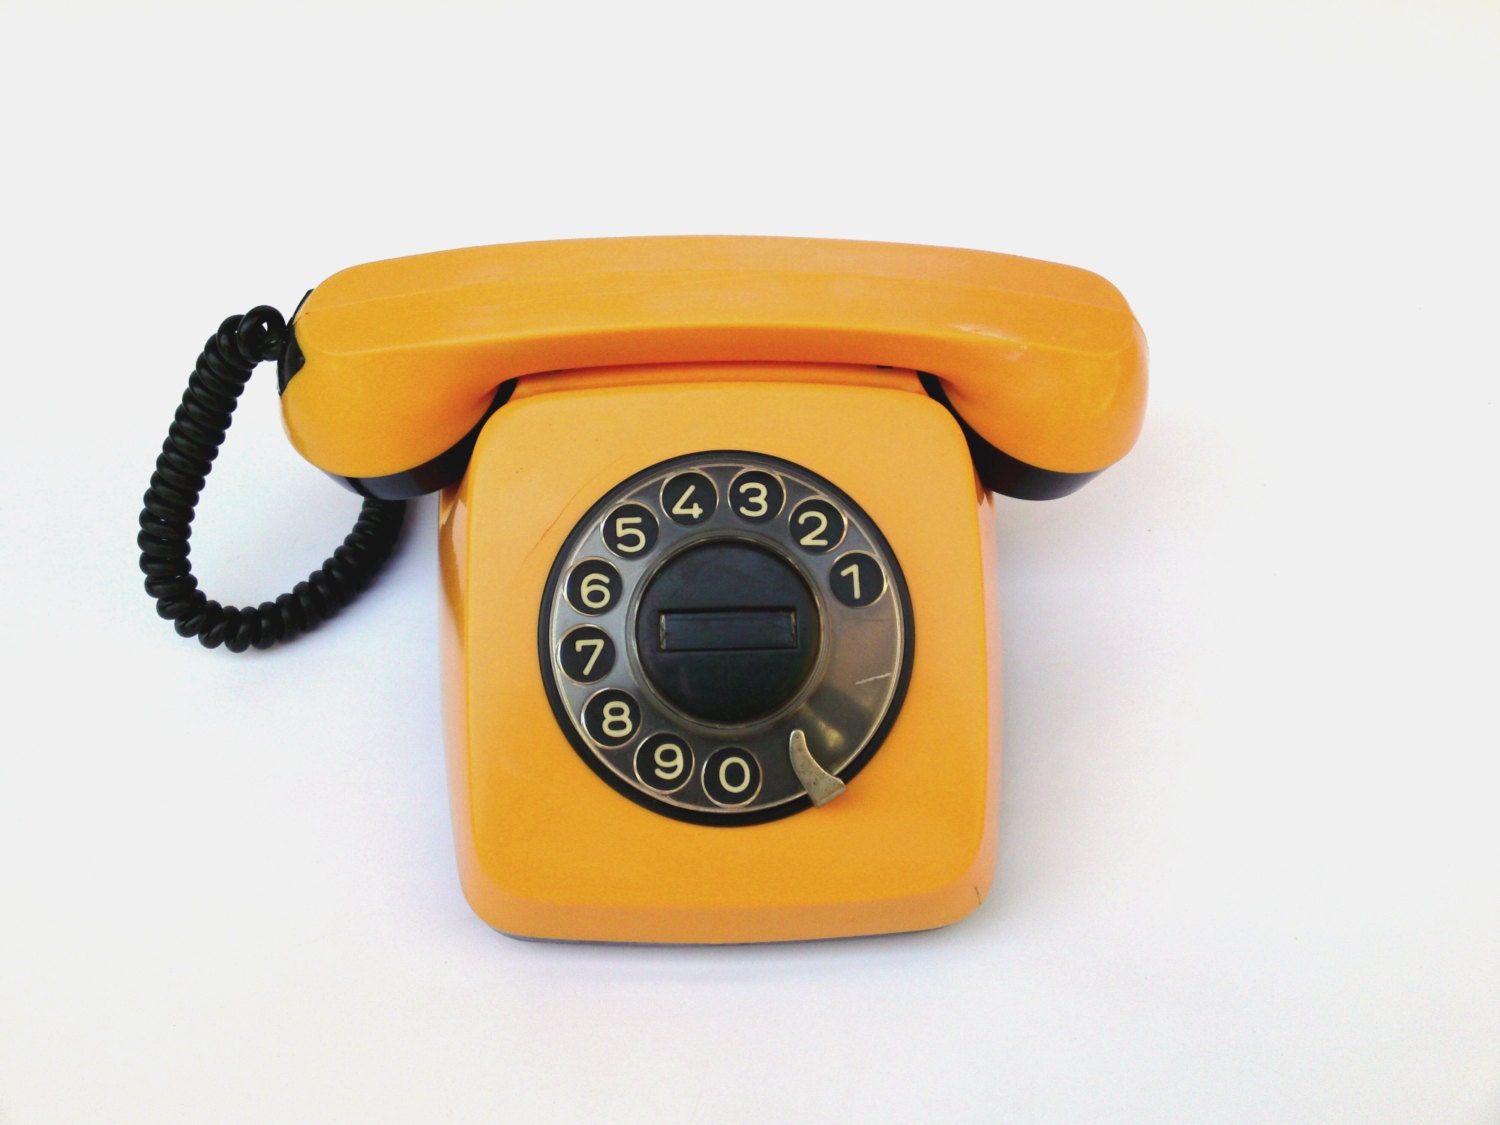 Vintage soviet union rotary phone TA-600 yellow rotary telephone rustic home decor bell made in Europe rotary dial phone rare collectibles